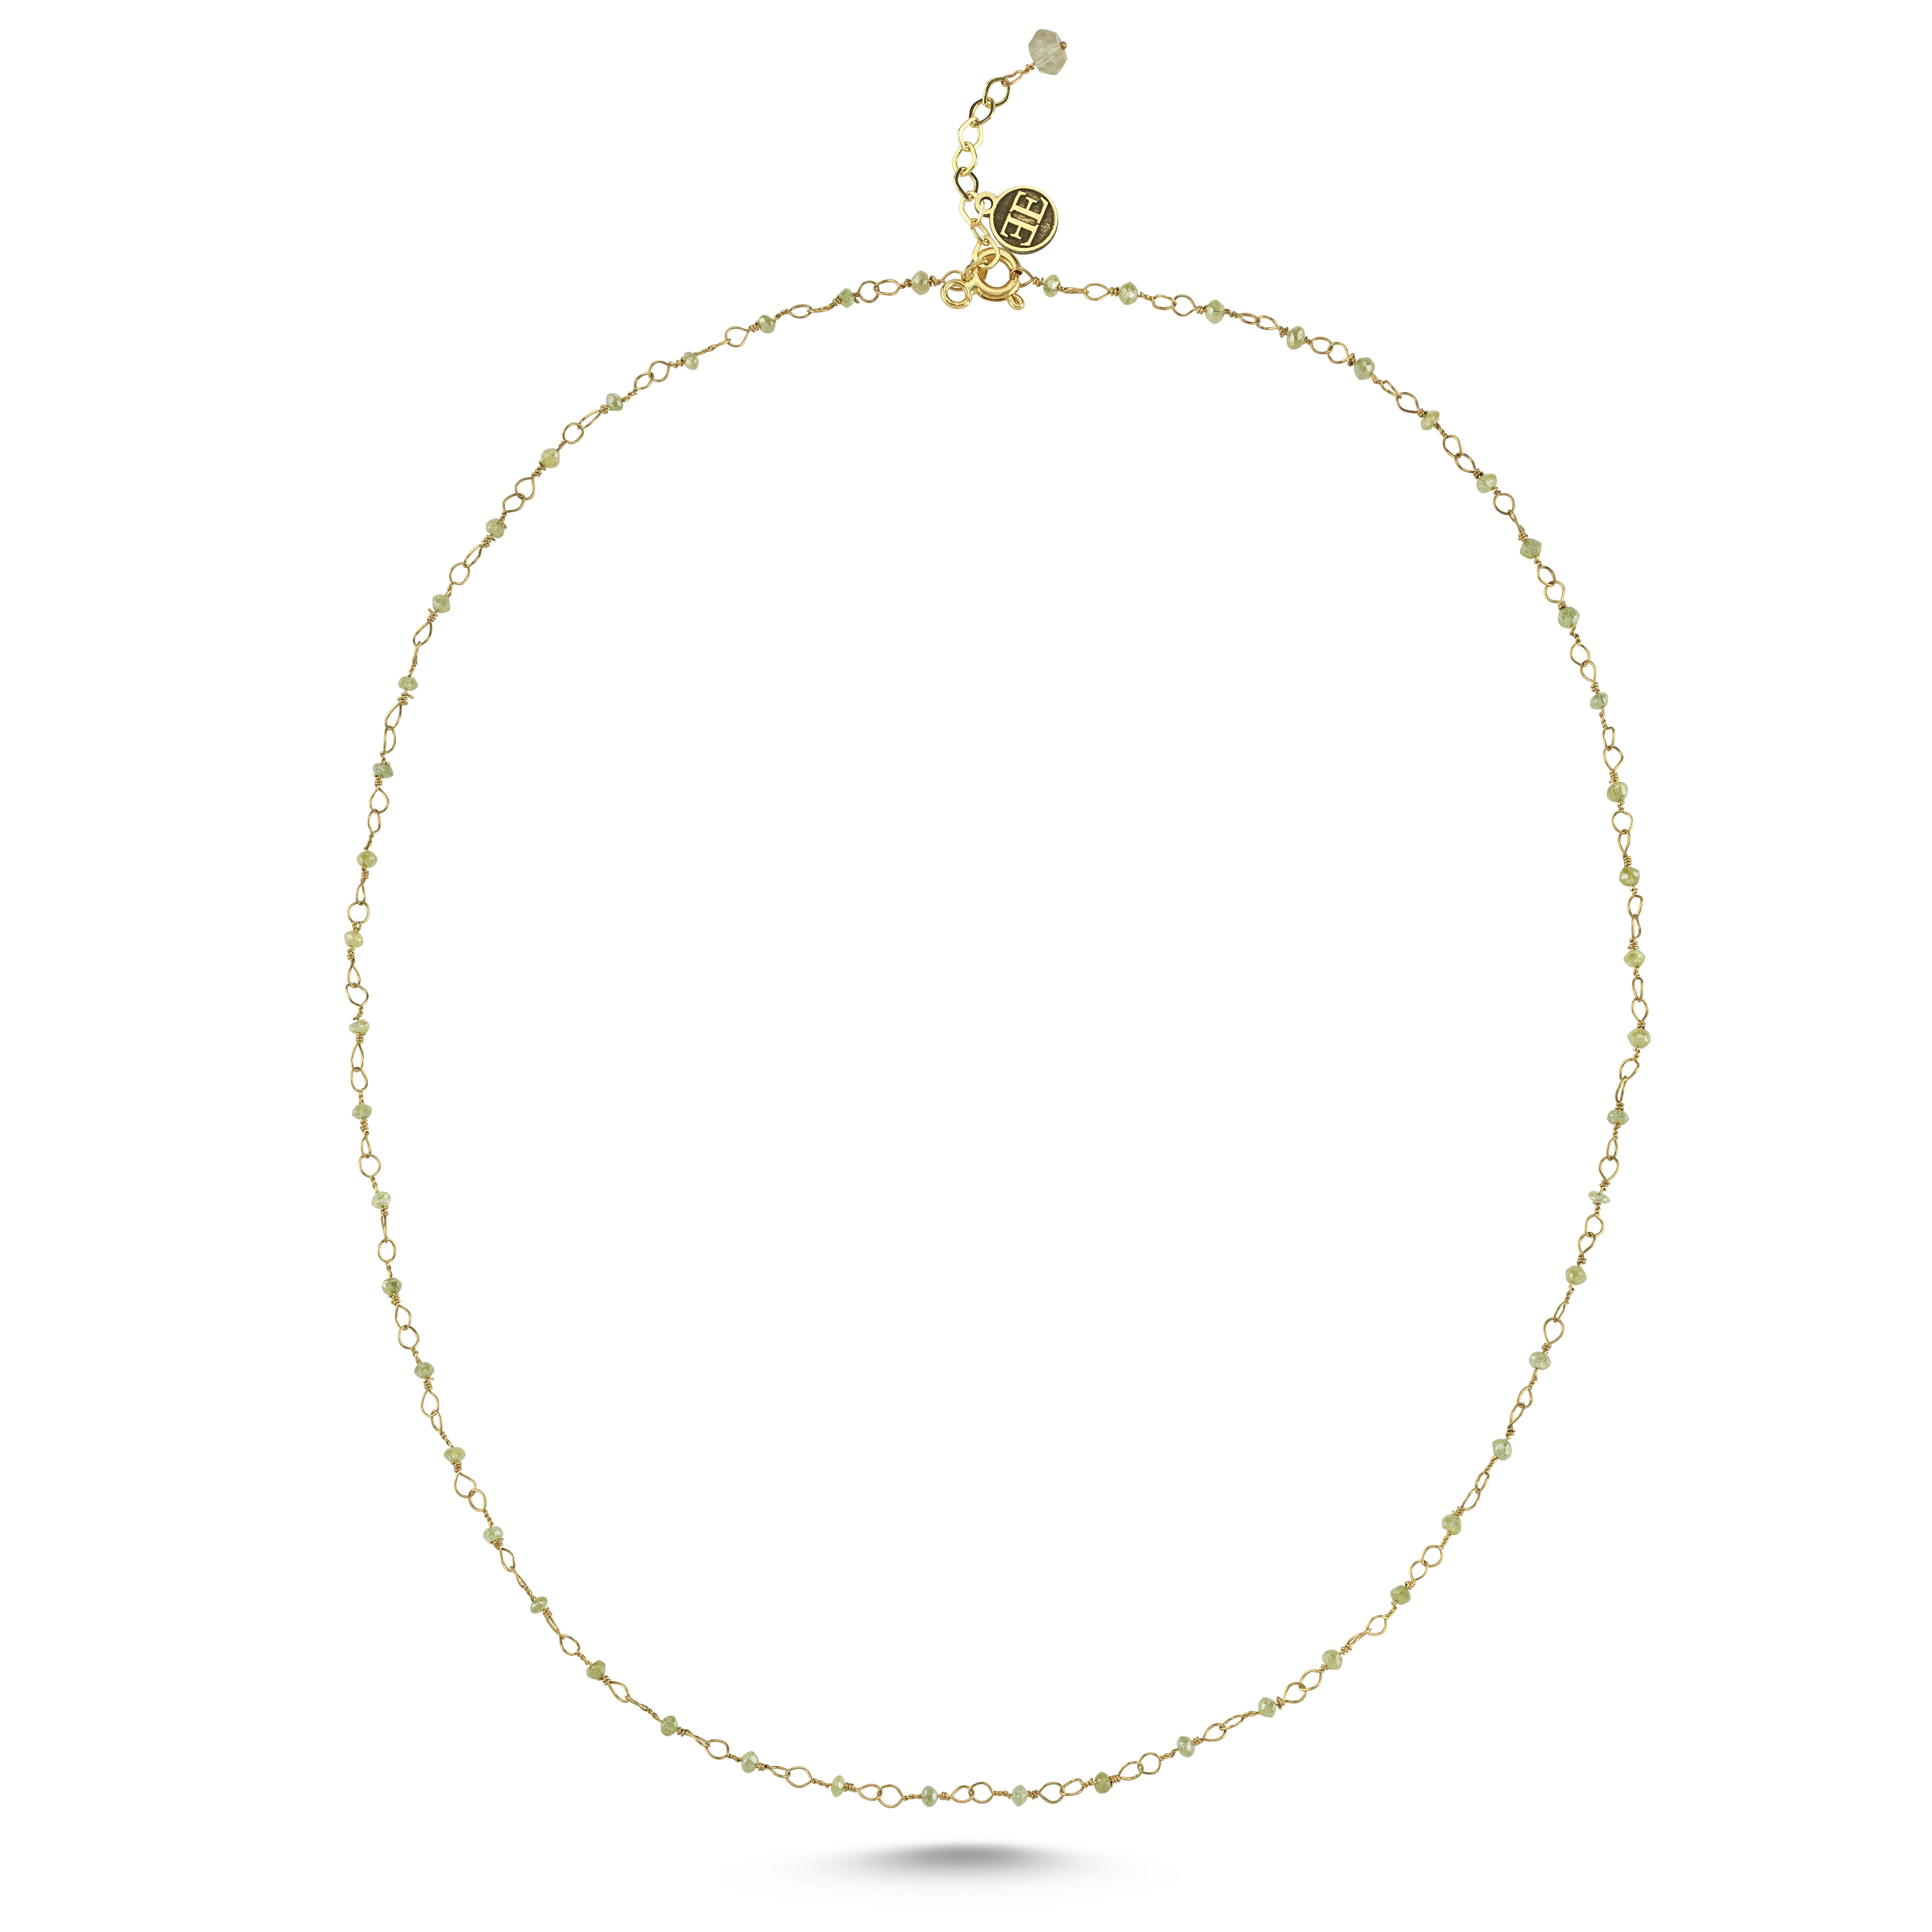 This necklace is handmade with 14K gold and bead cut diamonds. You can prefer it also with black diamonds.